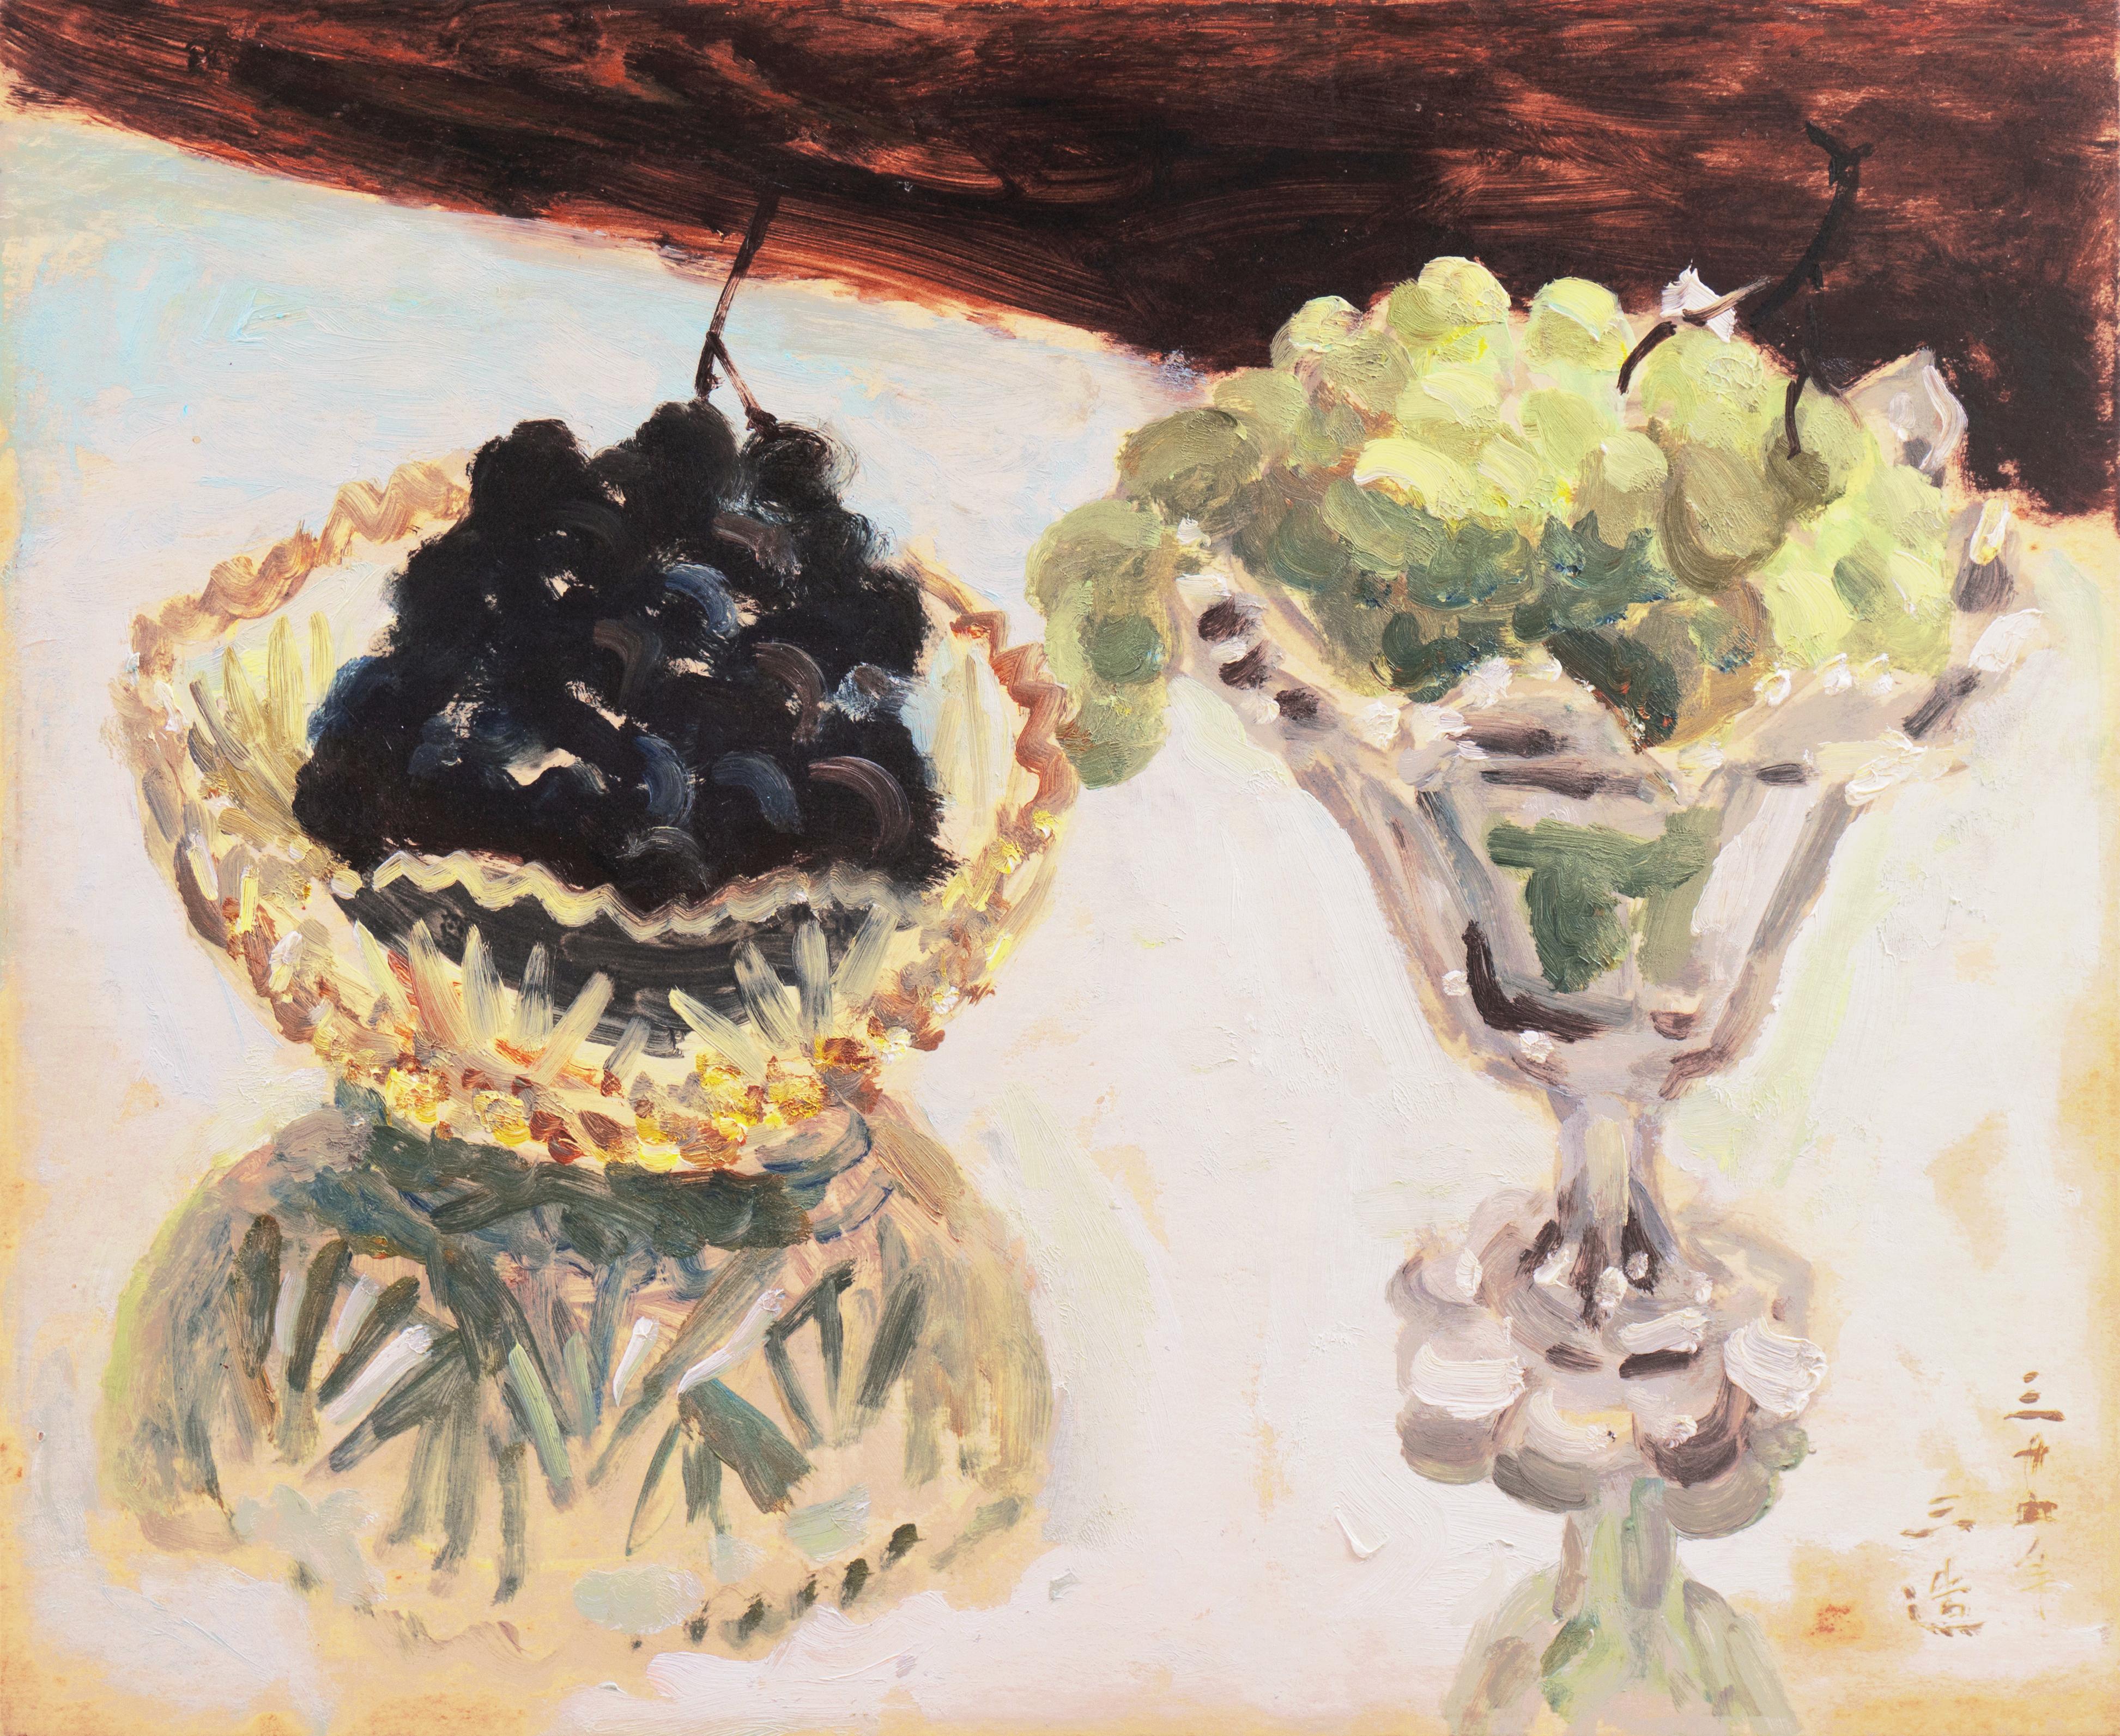 'Still Life of Green and Black Grapes', Tokyo School of Fine Arts, Academy Award - Painting by Sanzo Wada